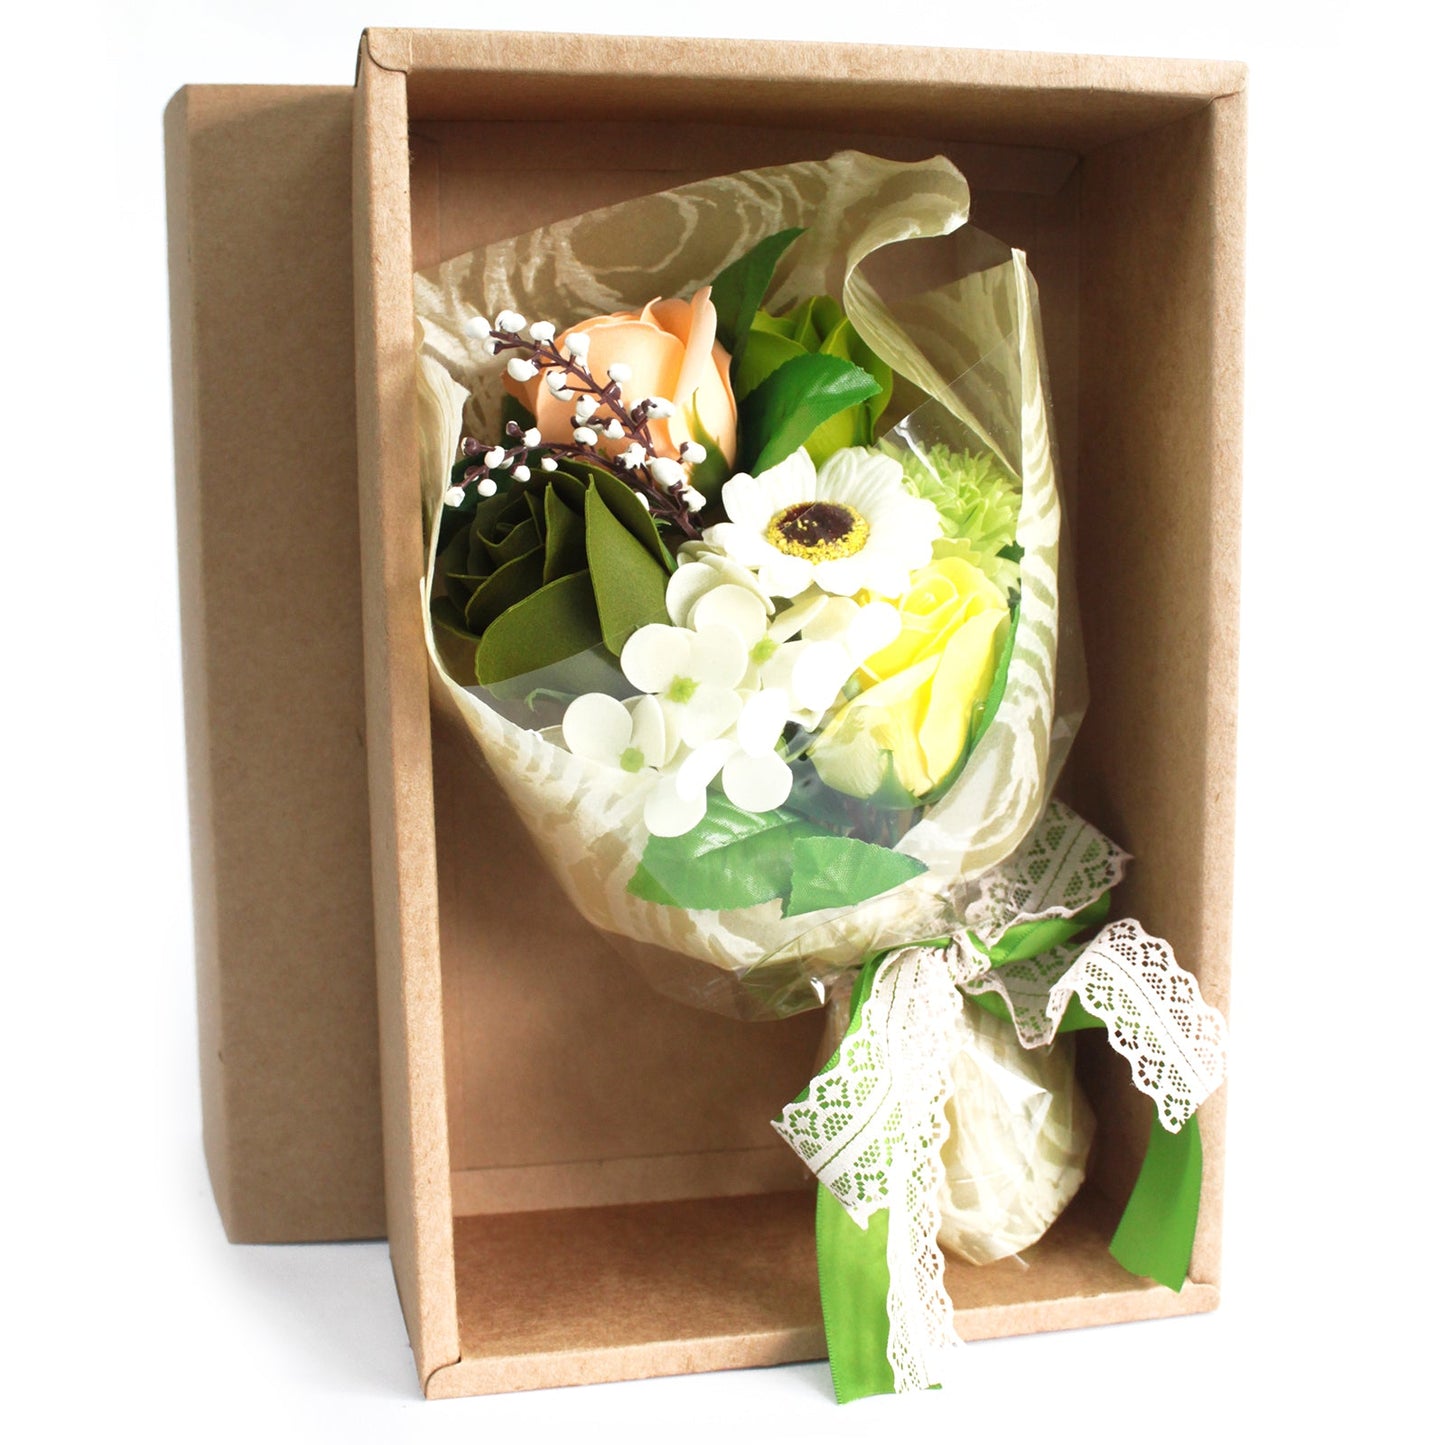 Flower Soap Bouquet - Gift Boxed Soap Flowers Soul Inspired Green / Yellow 